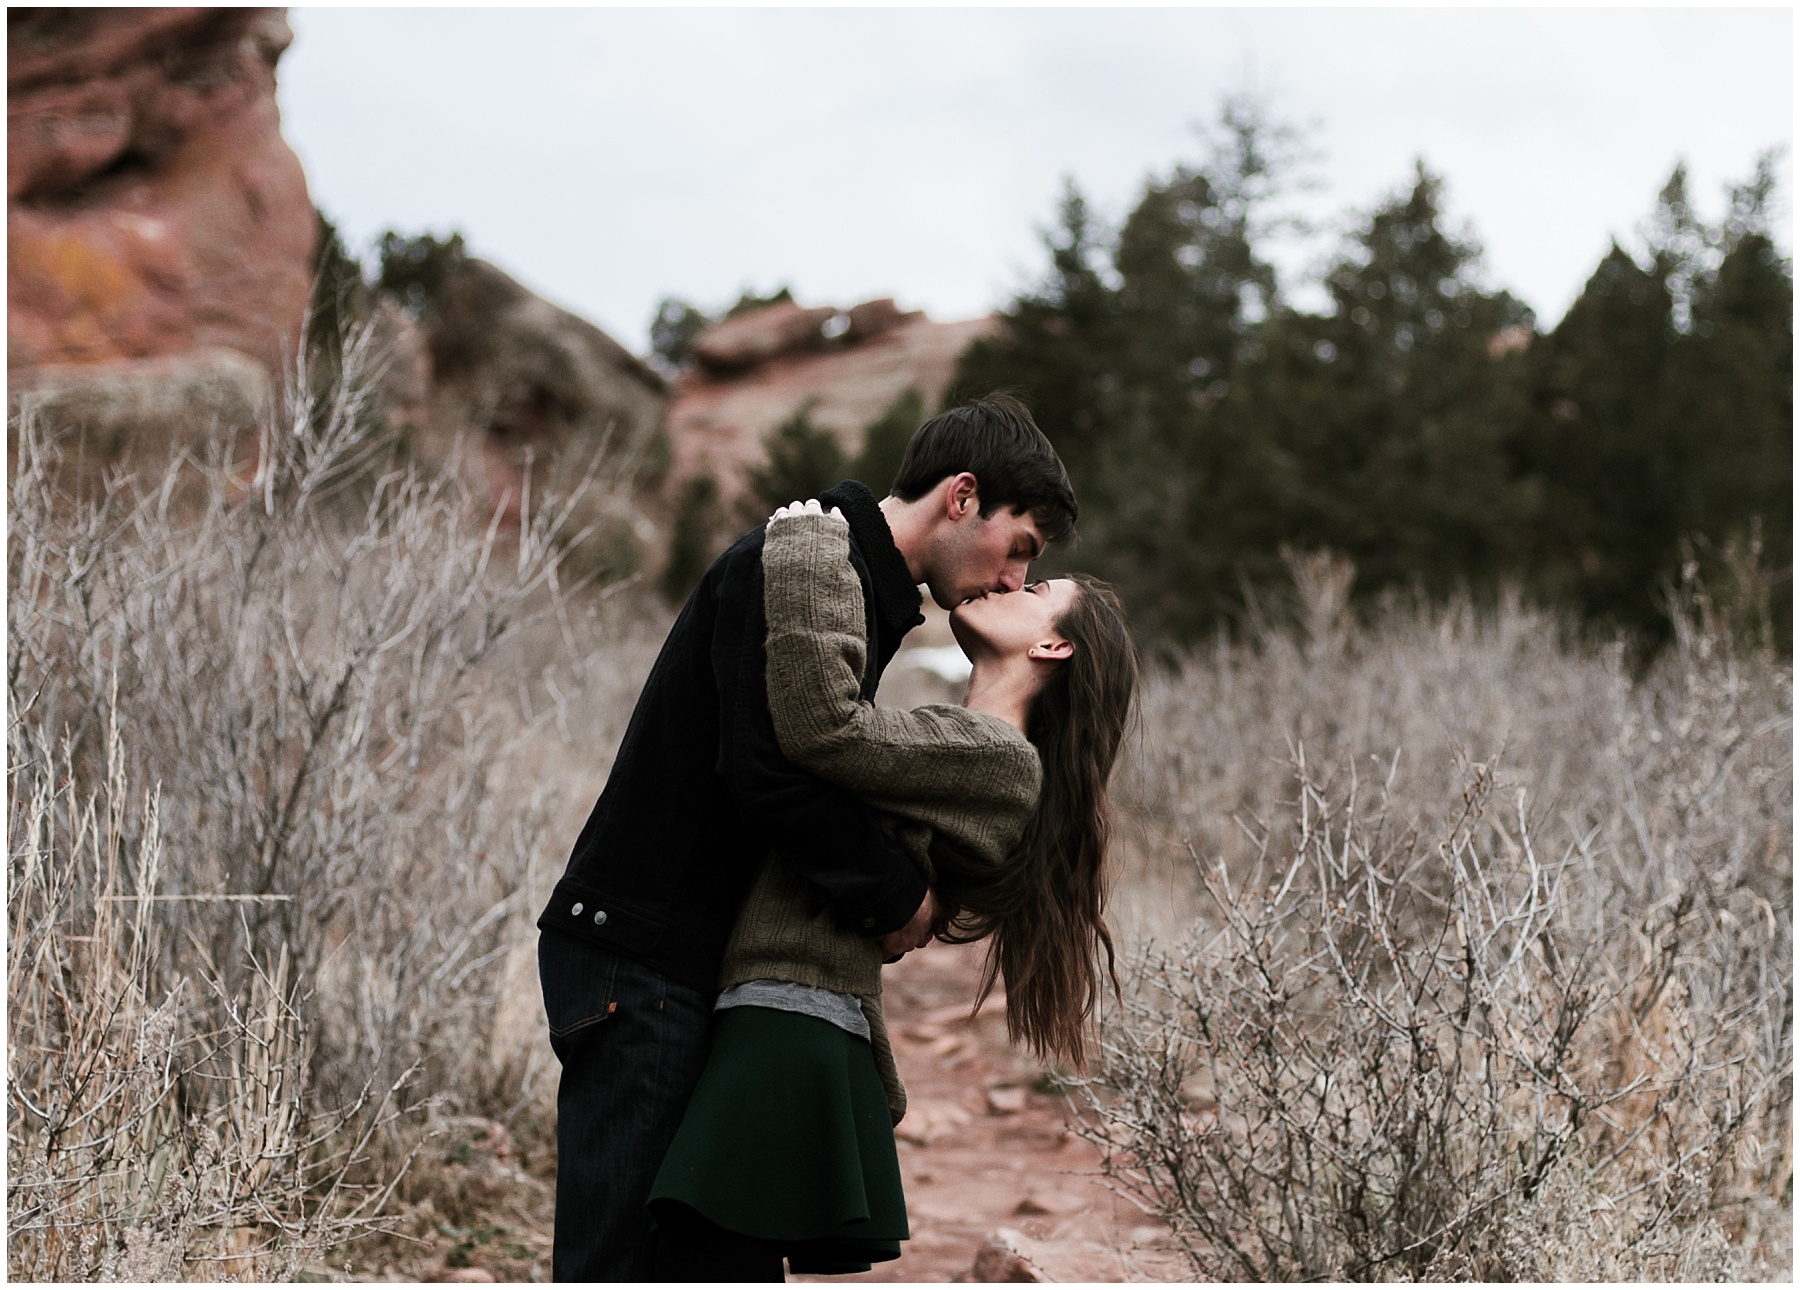 Katesalleyphotography-179_engagement shoot at Red Rocks.jpg